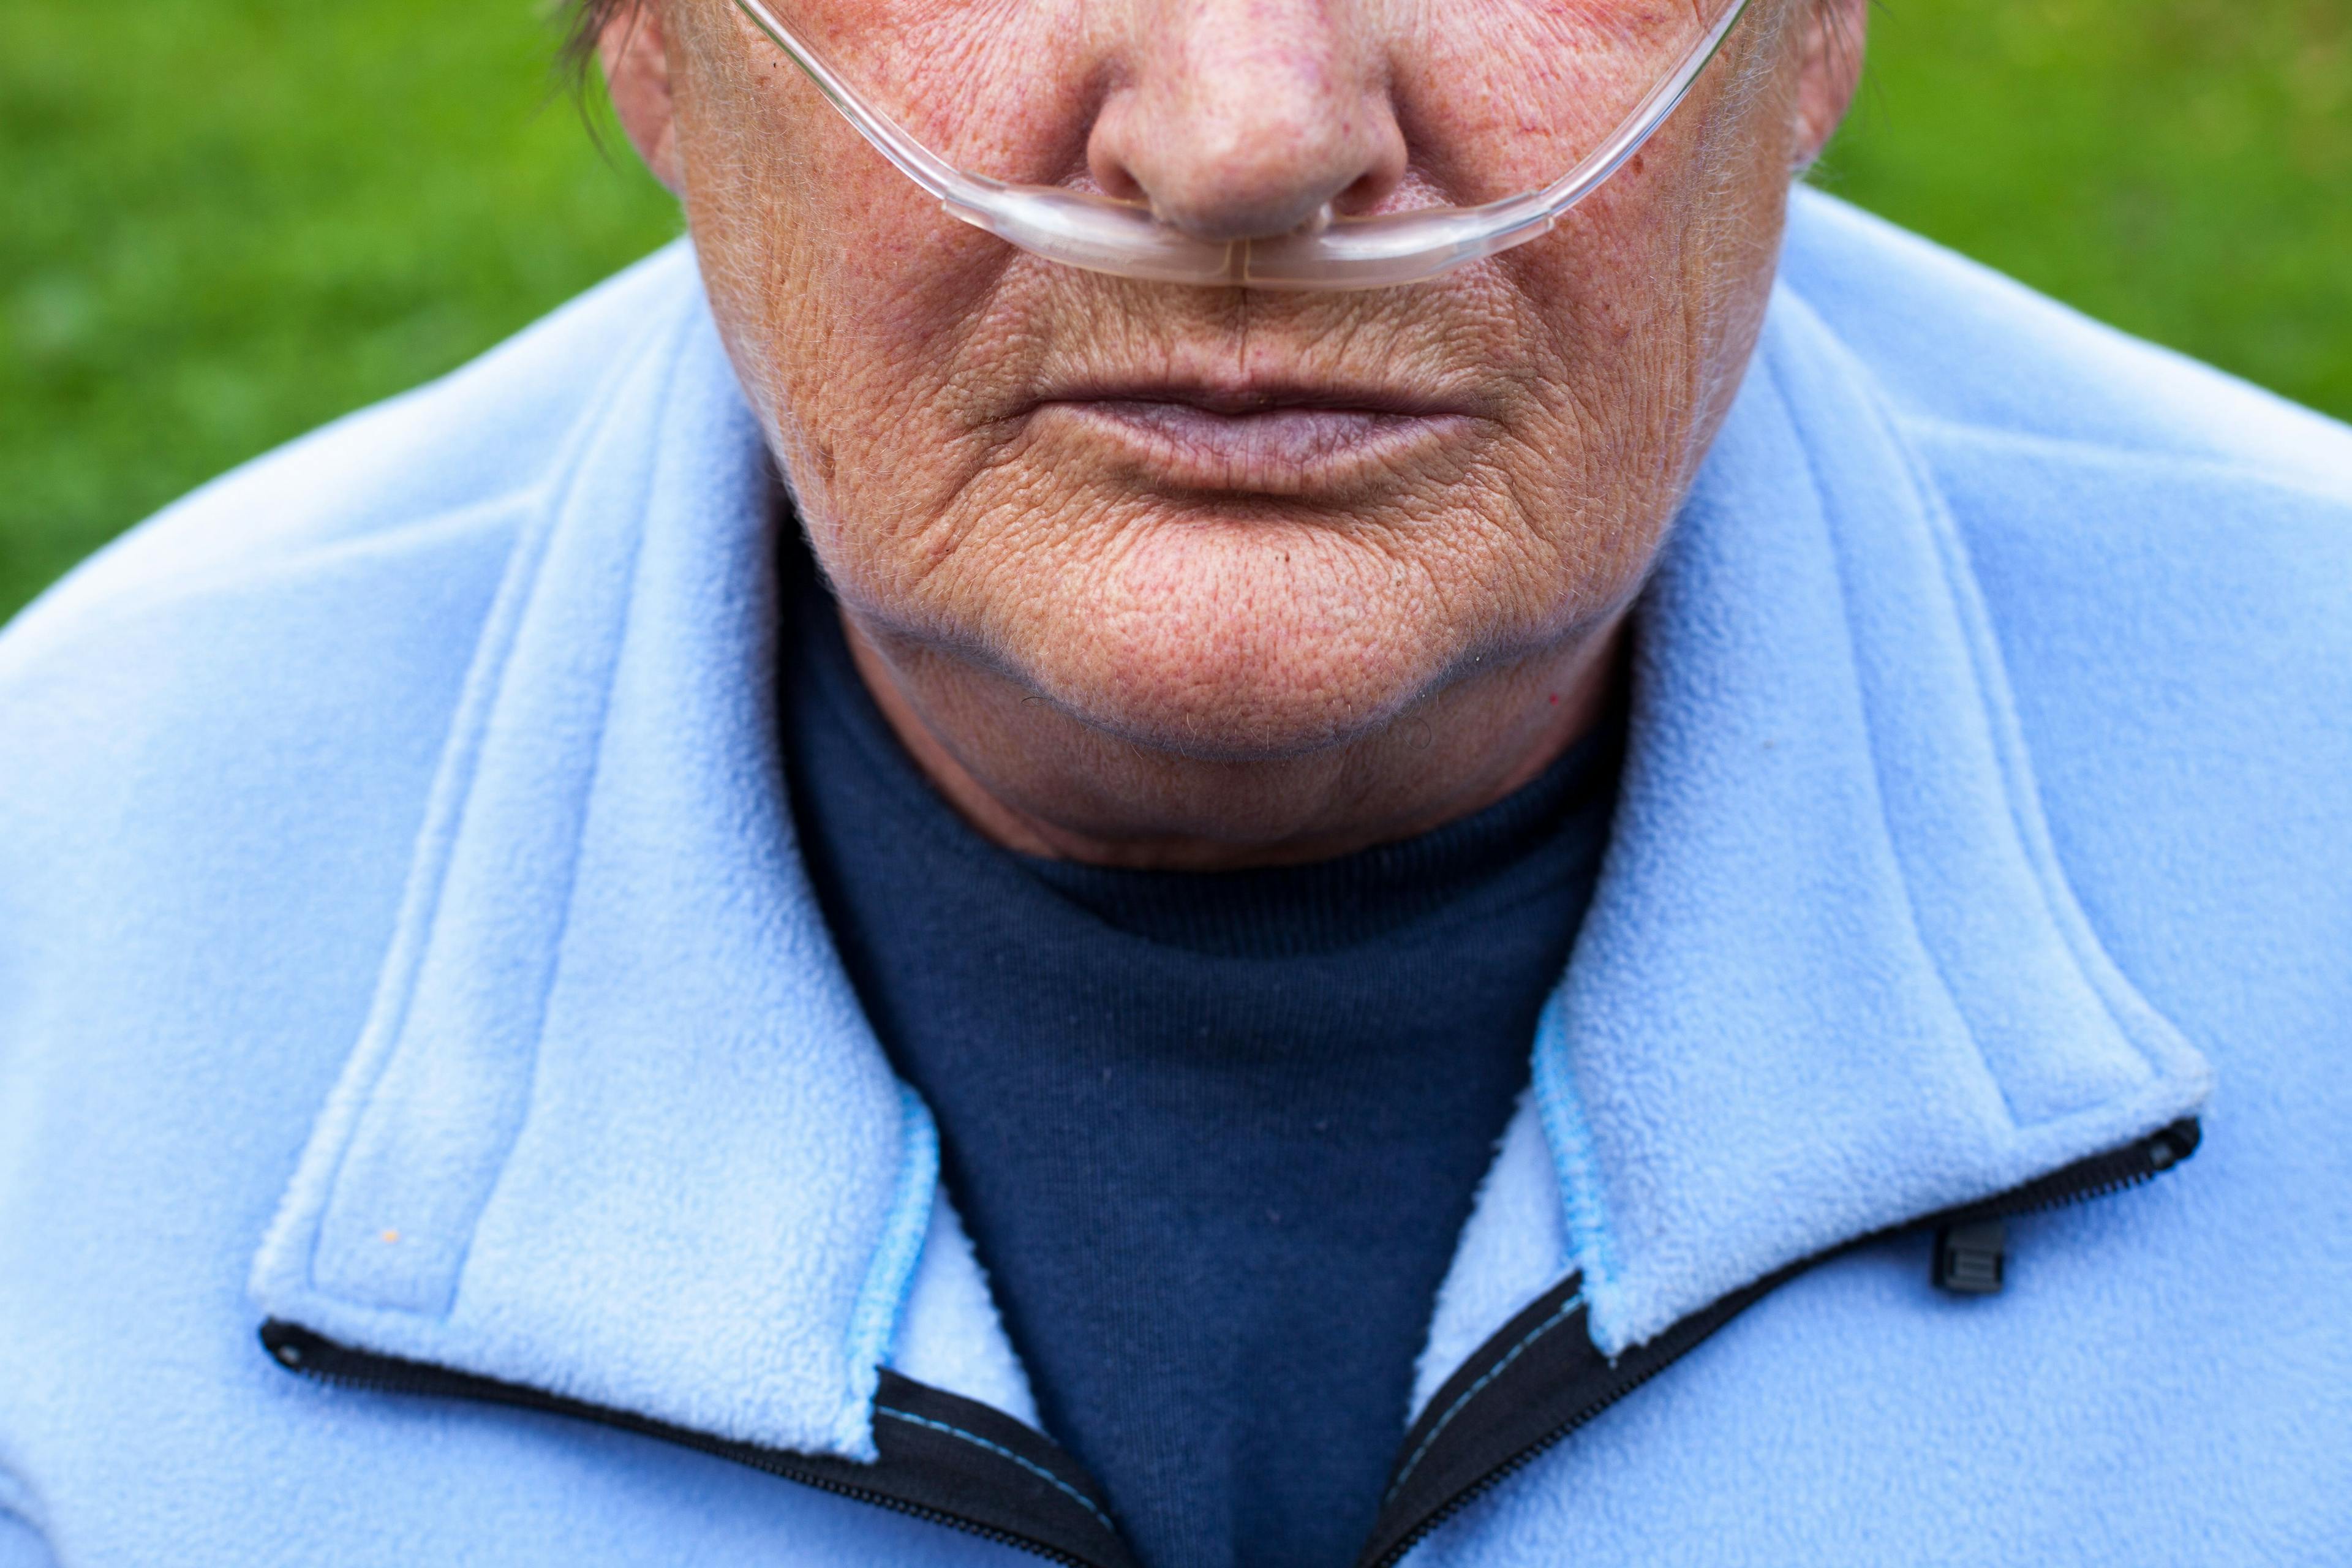 senior man with nose tubes for oxygen intake